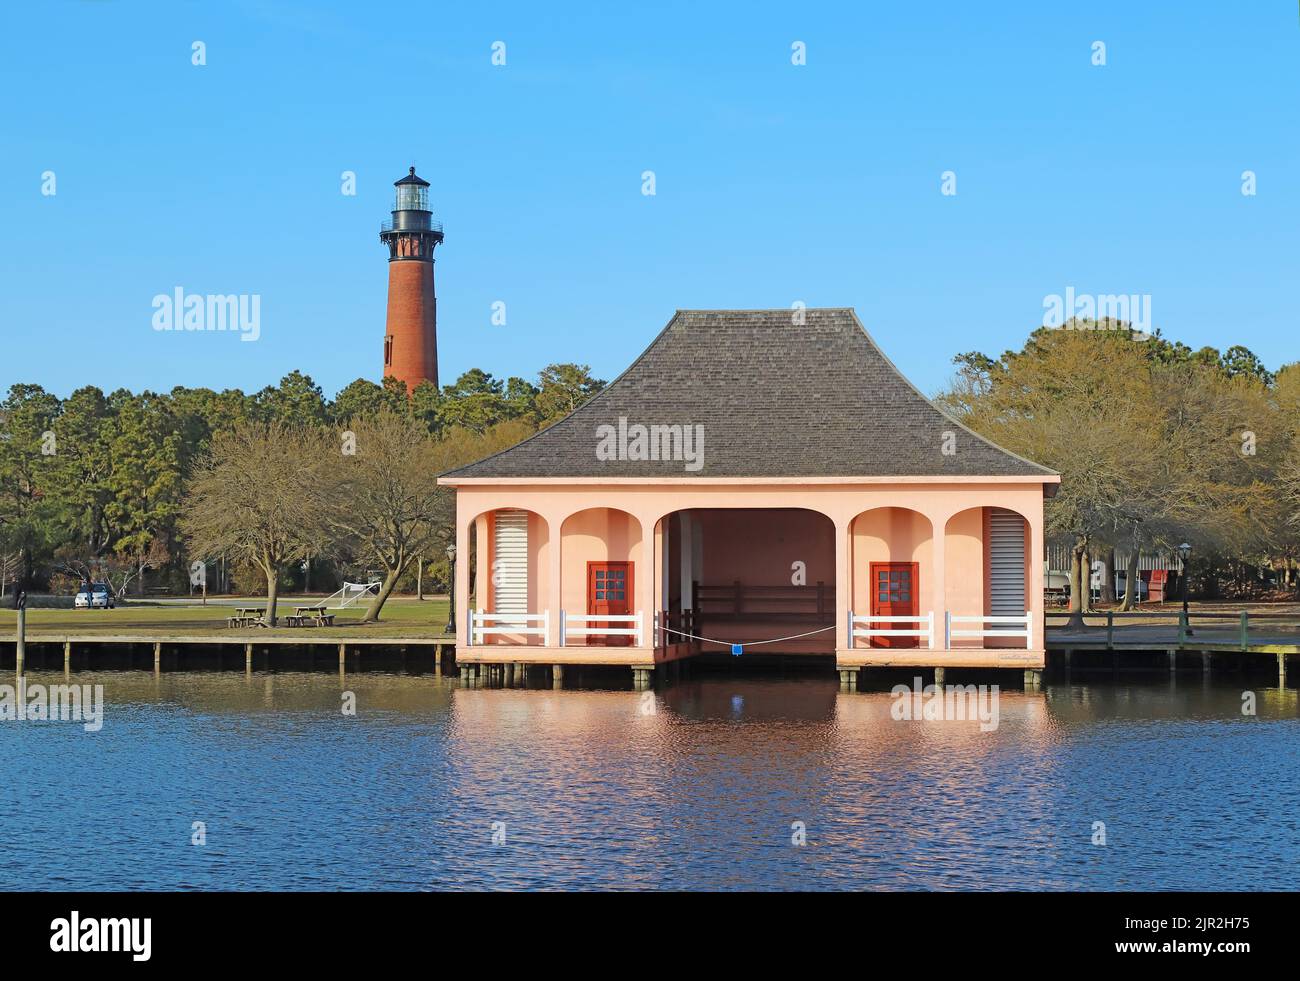 The red brick structure of the Currituck Beach Lighthouse rises over a pink boathouse in a historic park near Corolla, North Carolina Stock Photo